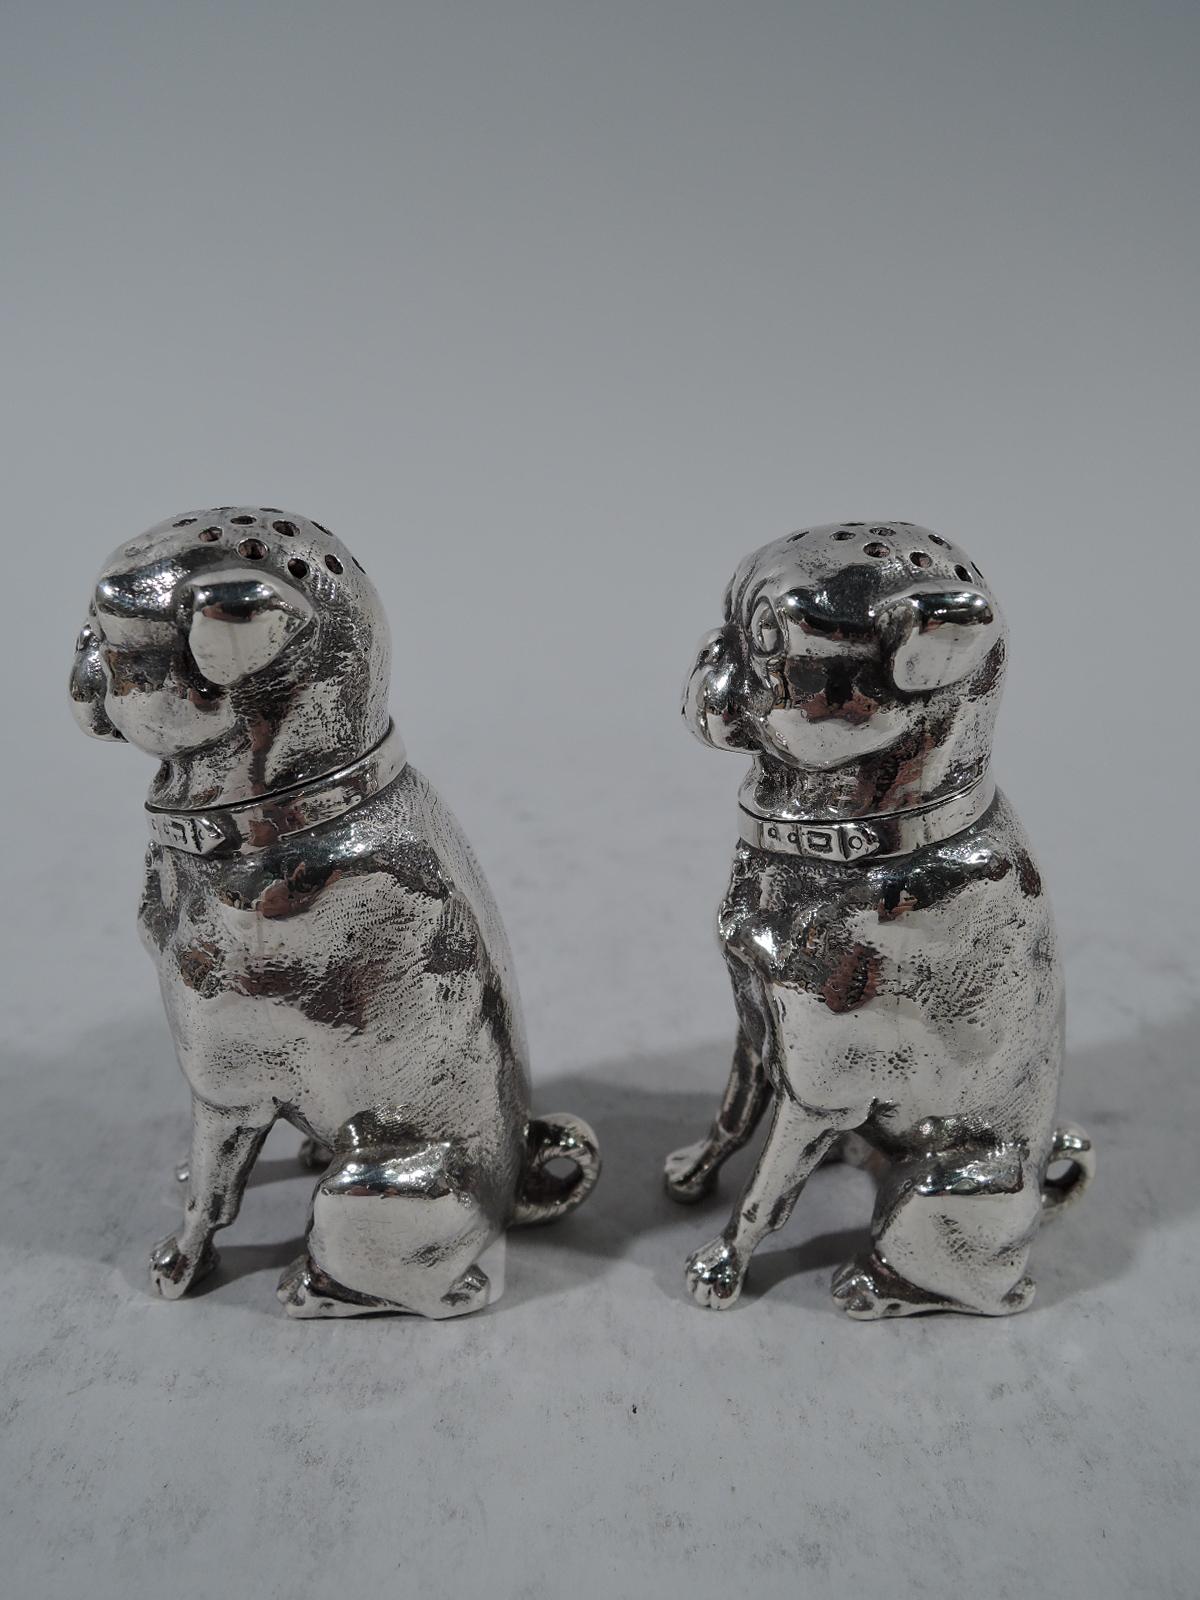 Pair of sterling silver dog-form salt and pepper shakers. Made by Dominick & Haff in New York in 1879. Each: cast figure of stocky seated pup with stiff forelegs and curlicue tail. Flat face with exophthalmic eyes and short snout. Head pierced and